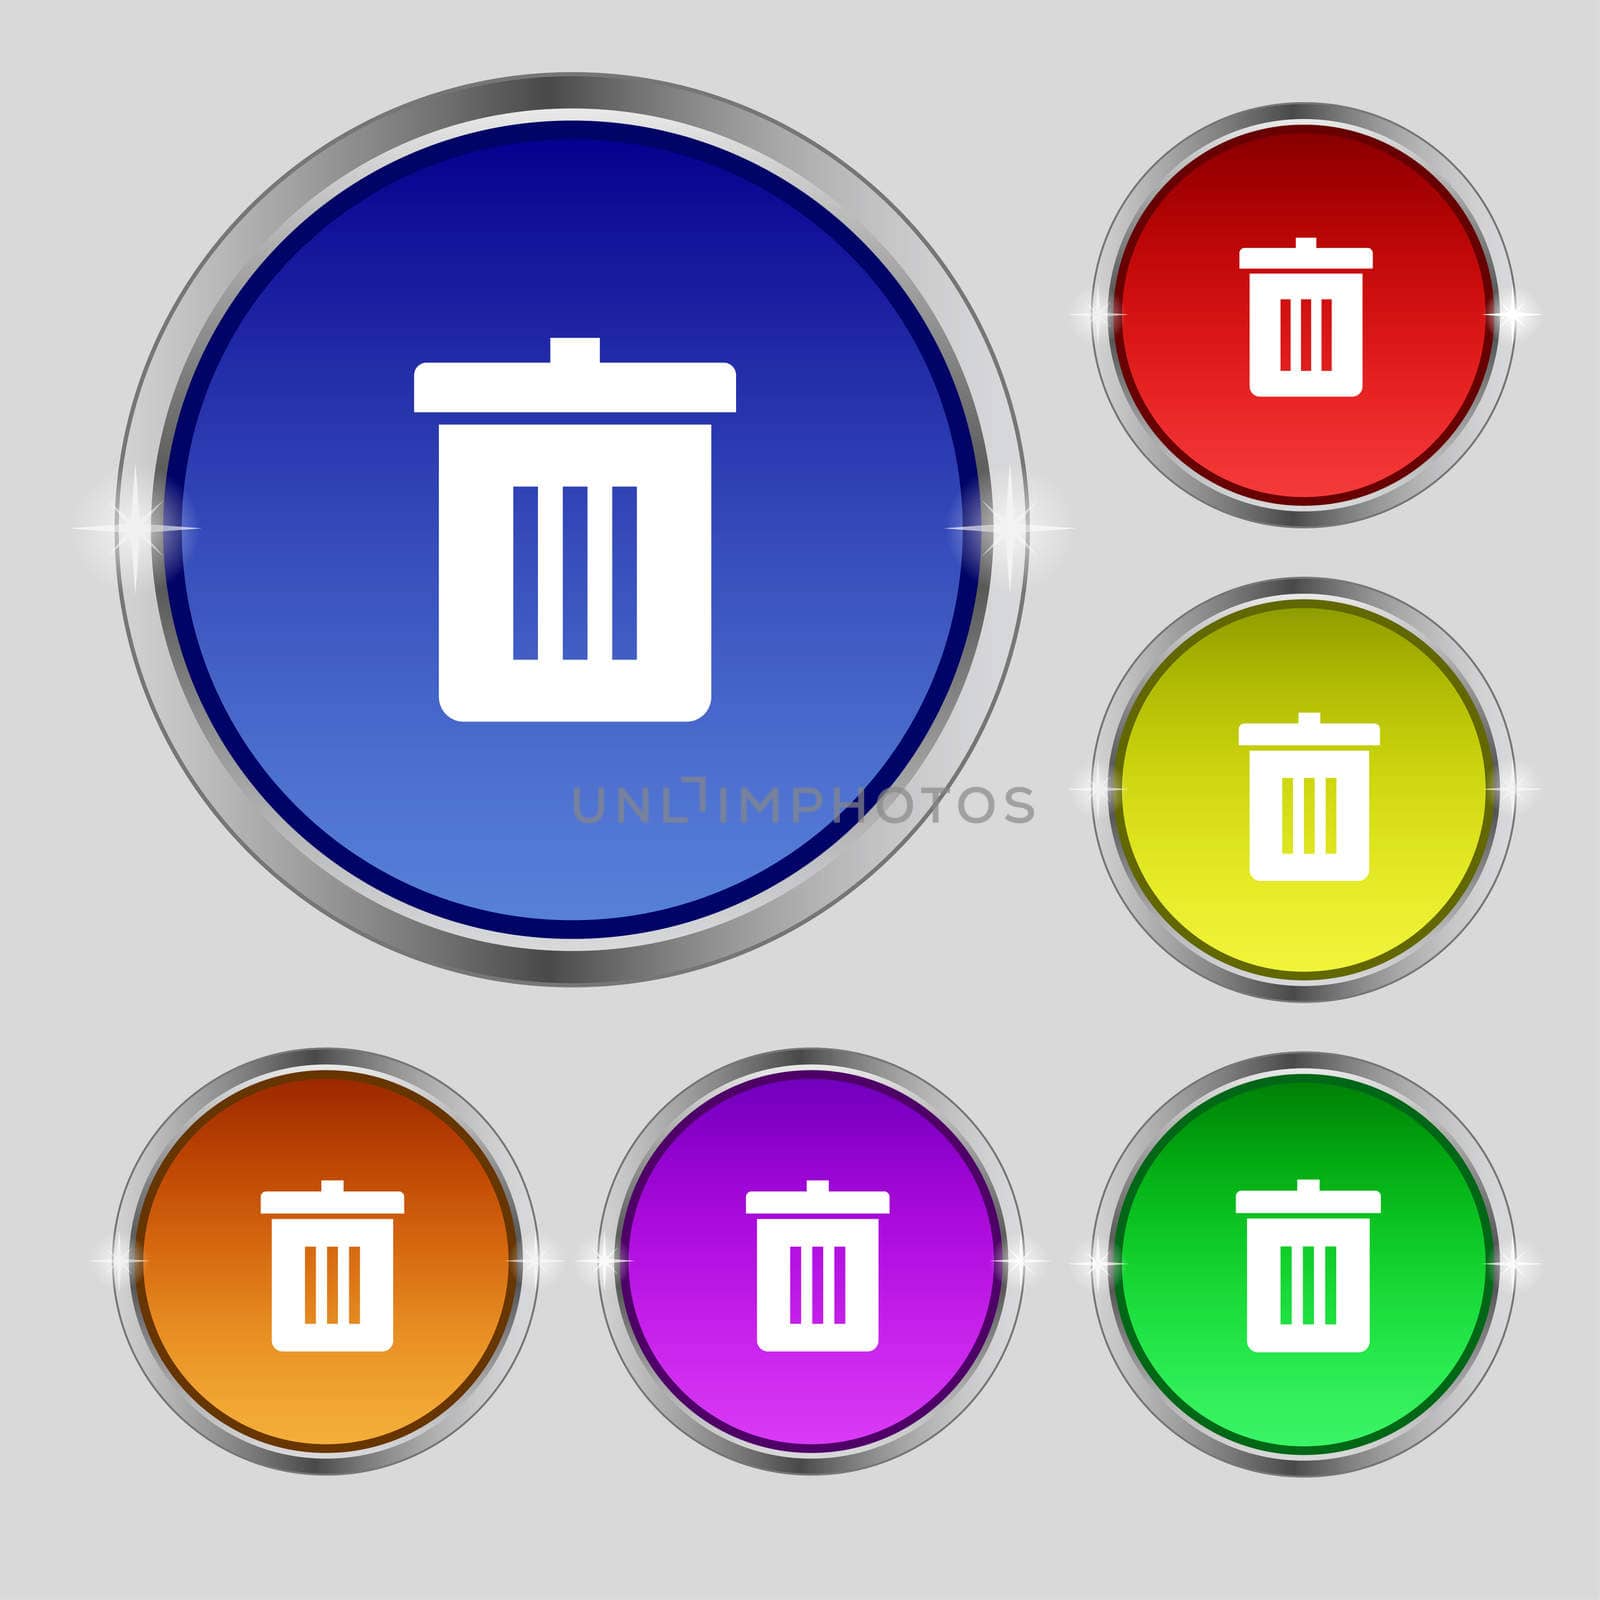 Recycle bin, Reuse or reduce icon sign. Round symbol on bright colourful buttons. illustration